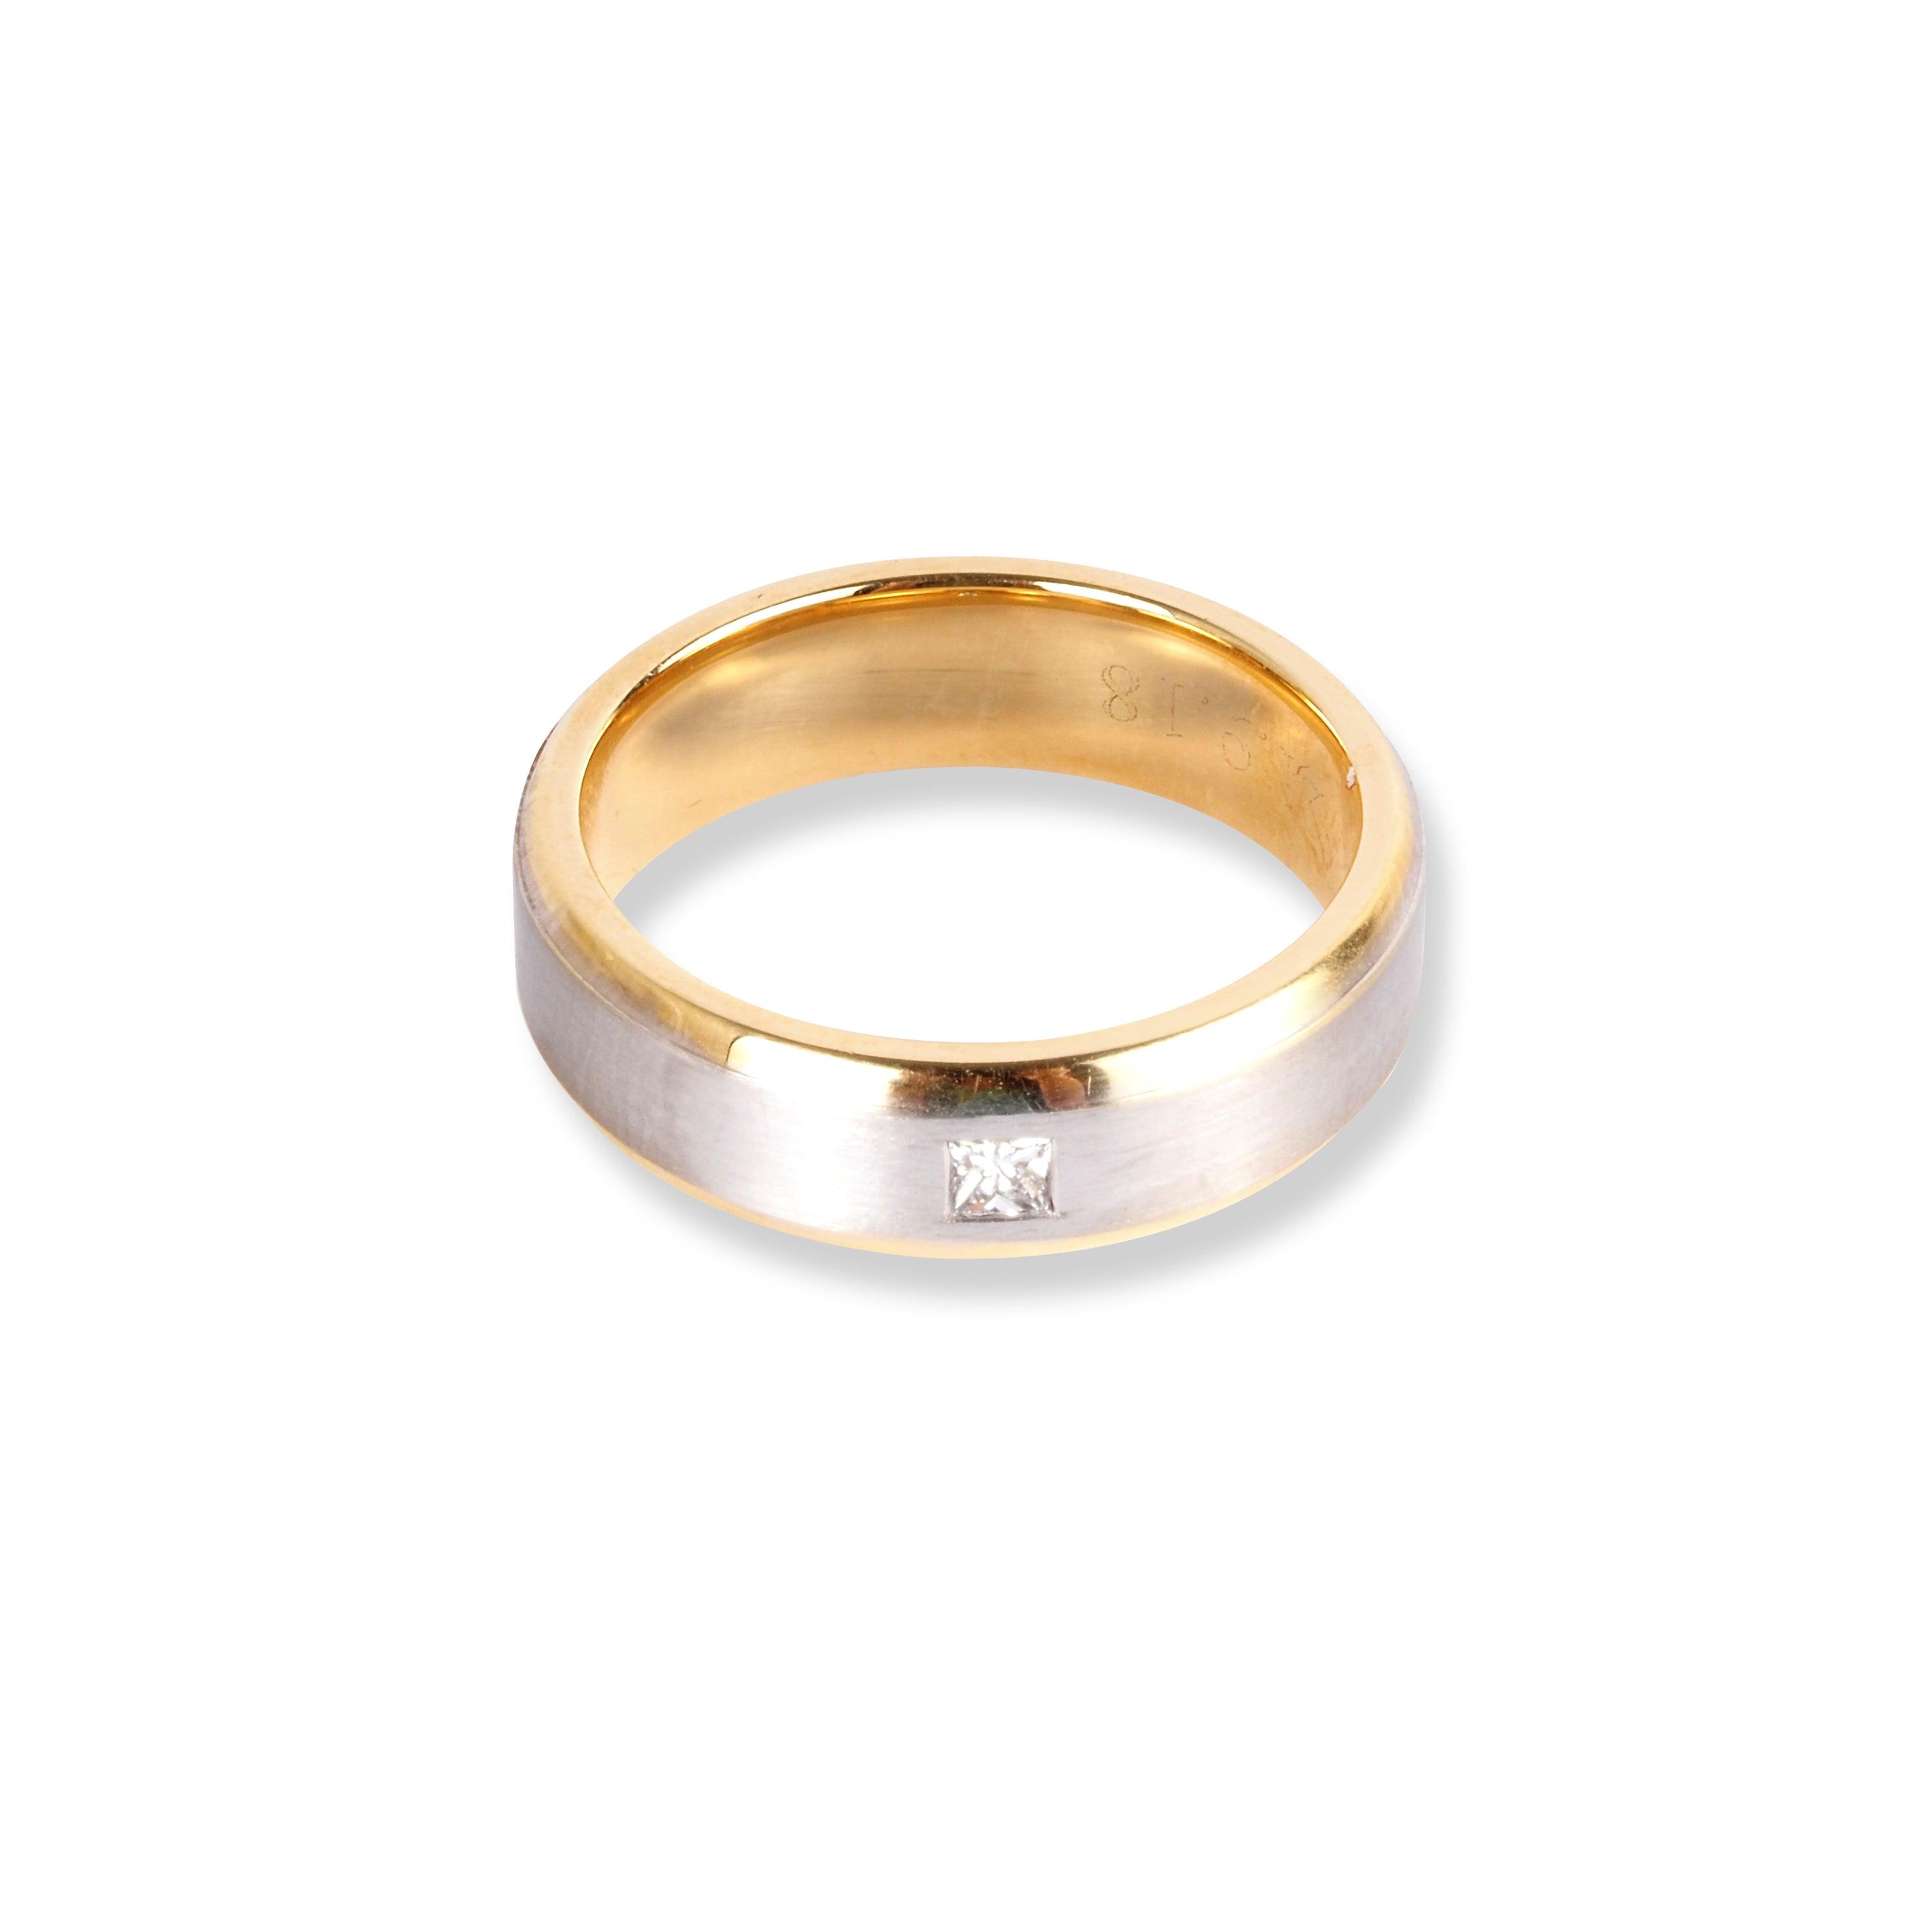 18ct White & Yellow Gold Wedding Band With Satin Finish & Polished Grooved Edges LR-6657 - Minar Jewellers